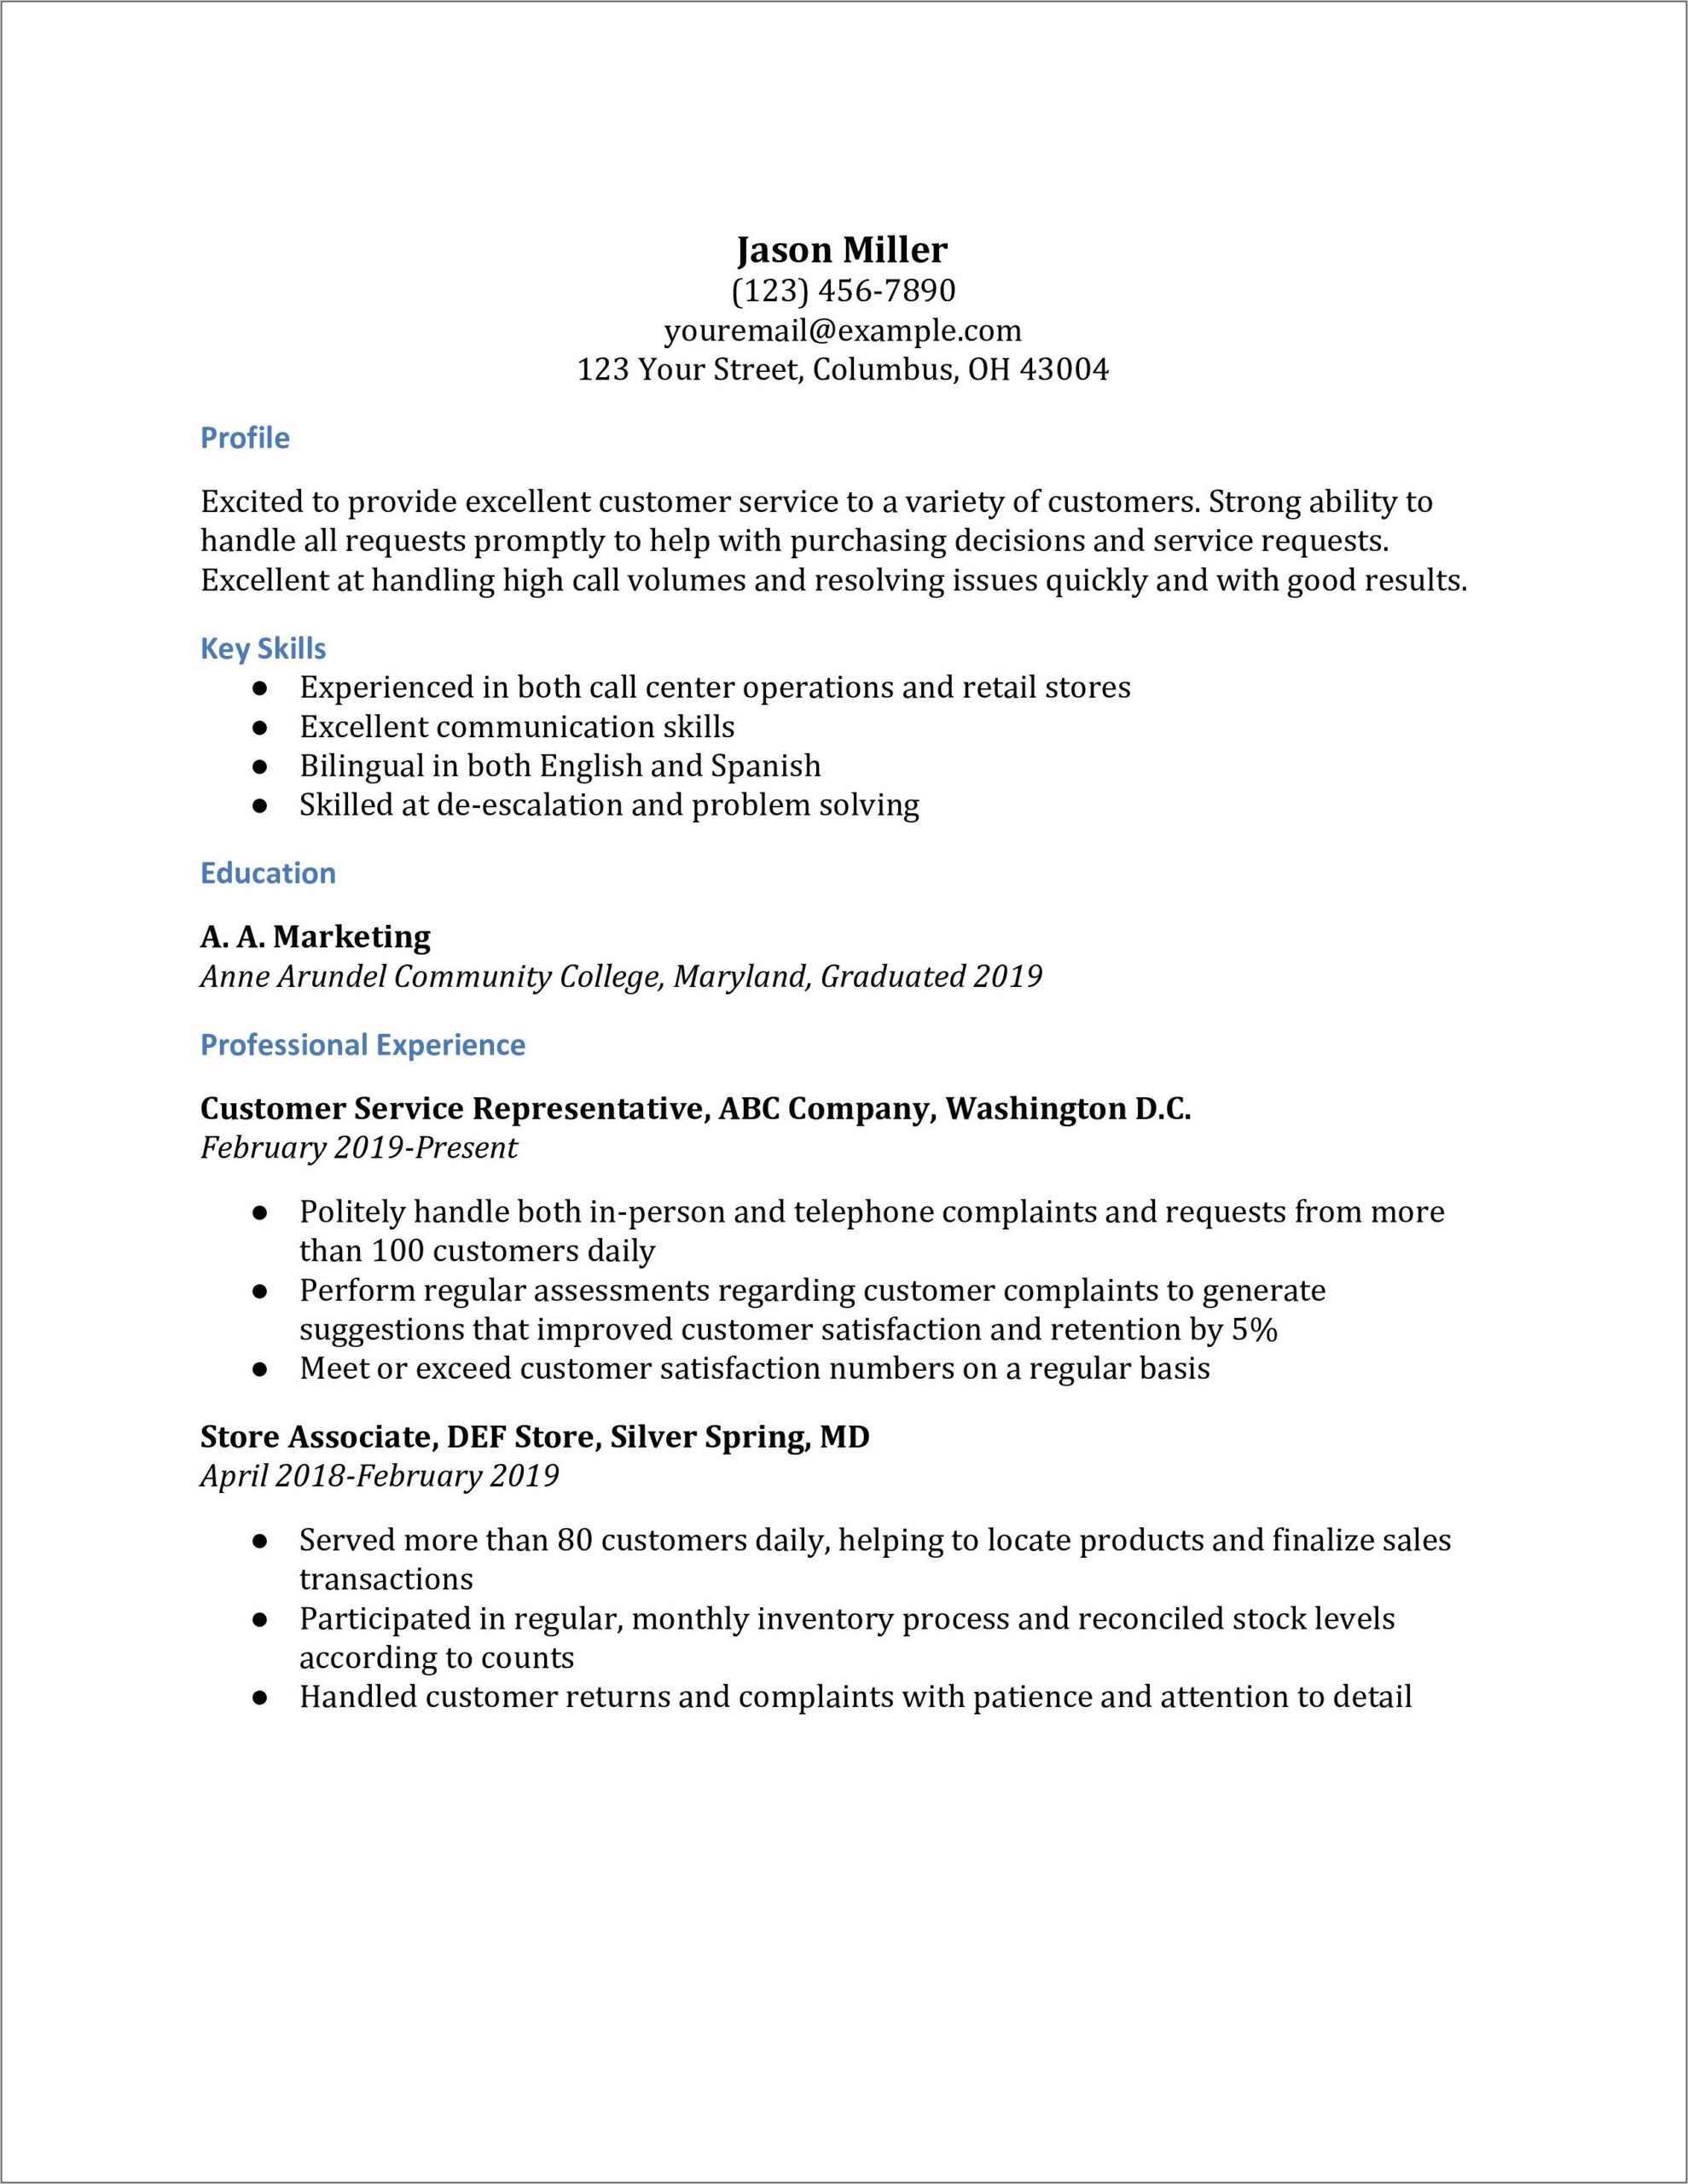 Resume Summary Excited To Return To Work